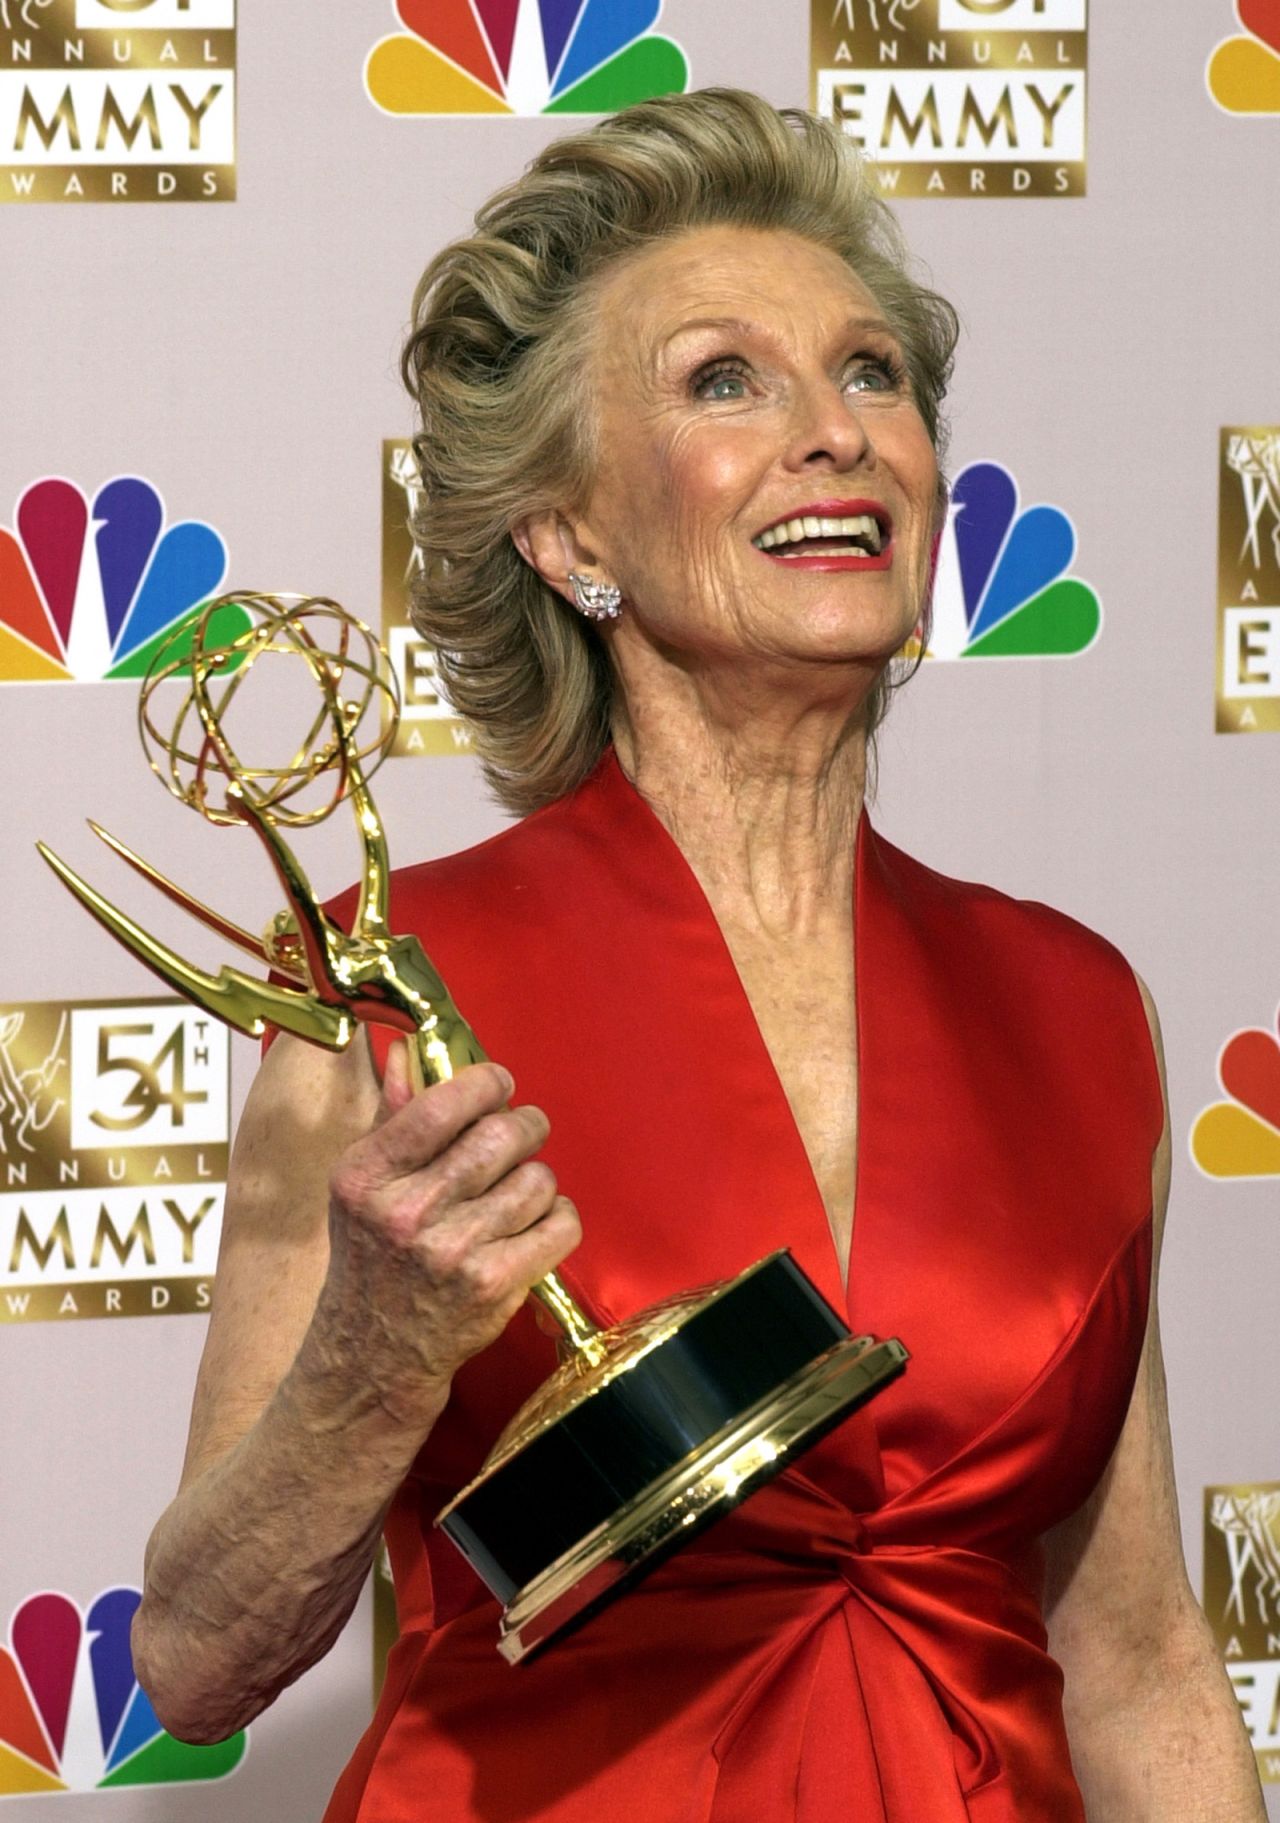 Leachman shows off the Emmy Award she won for her guest role in "Malcolm in the Middle" in 2002.